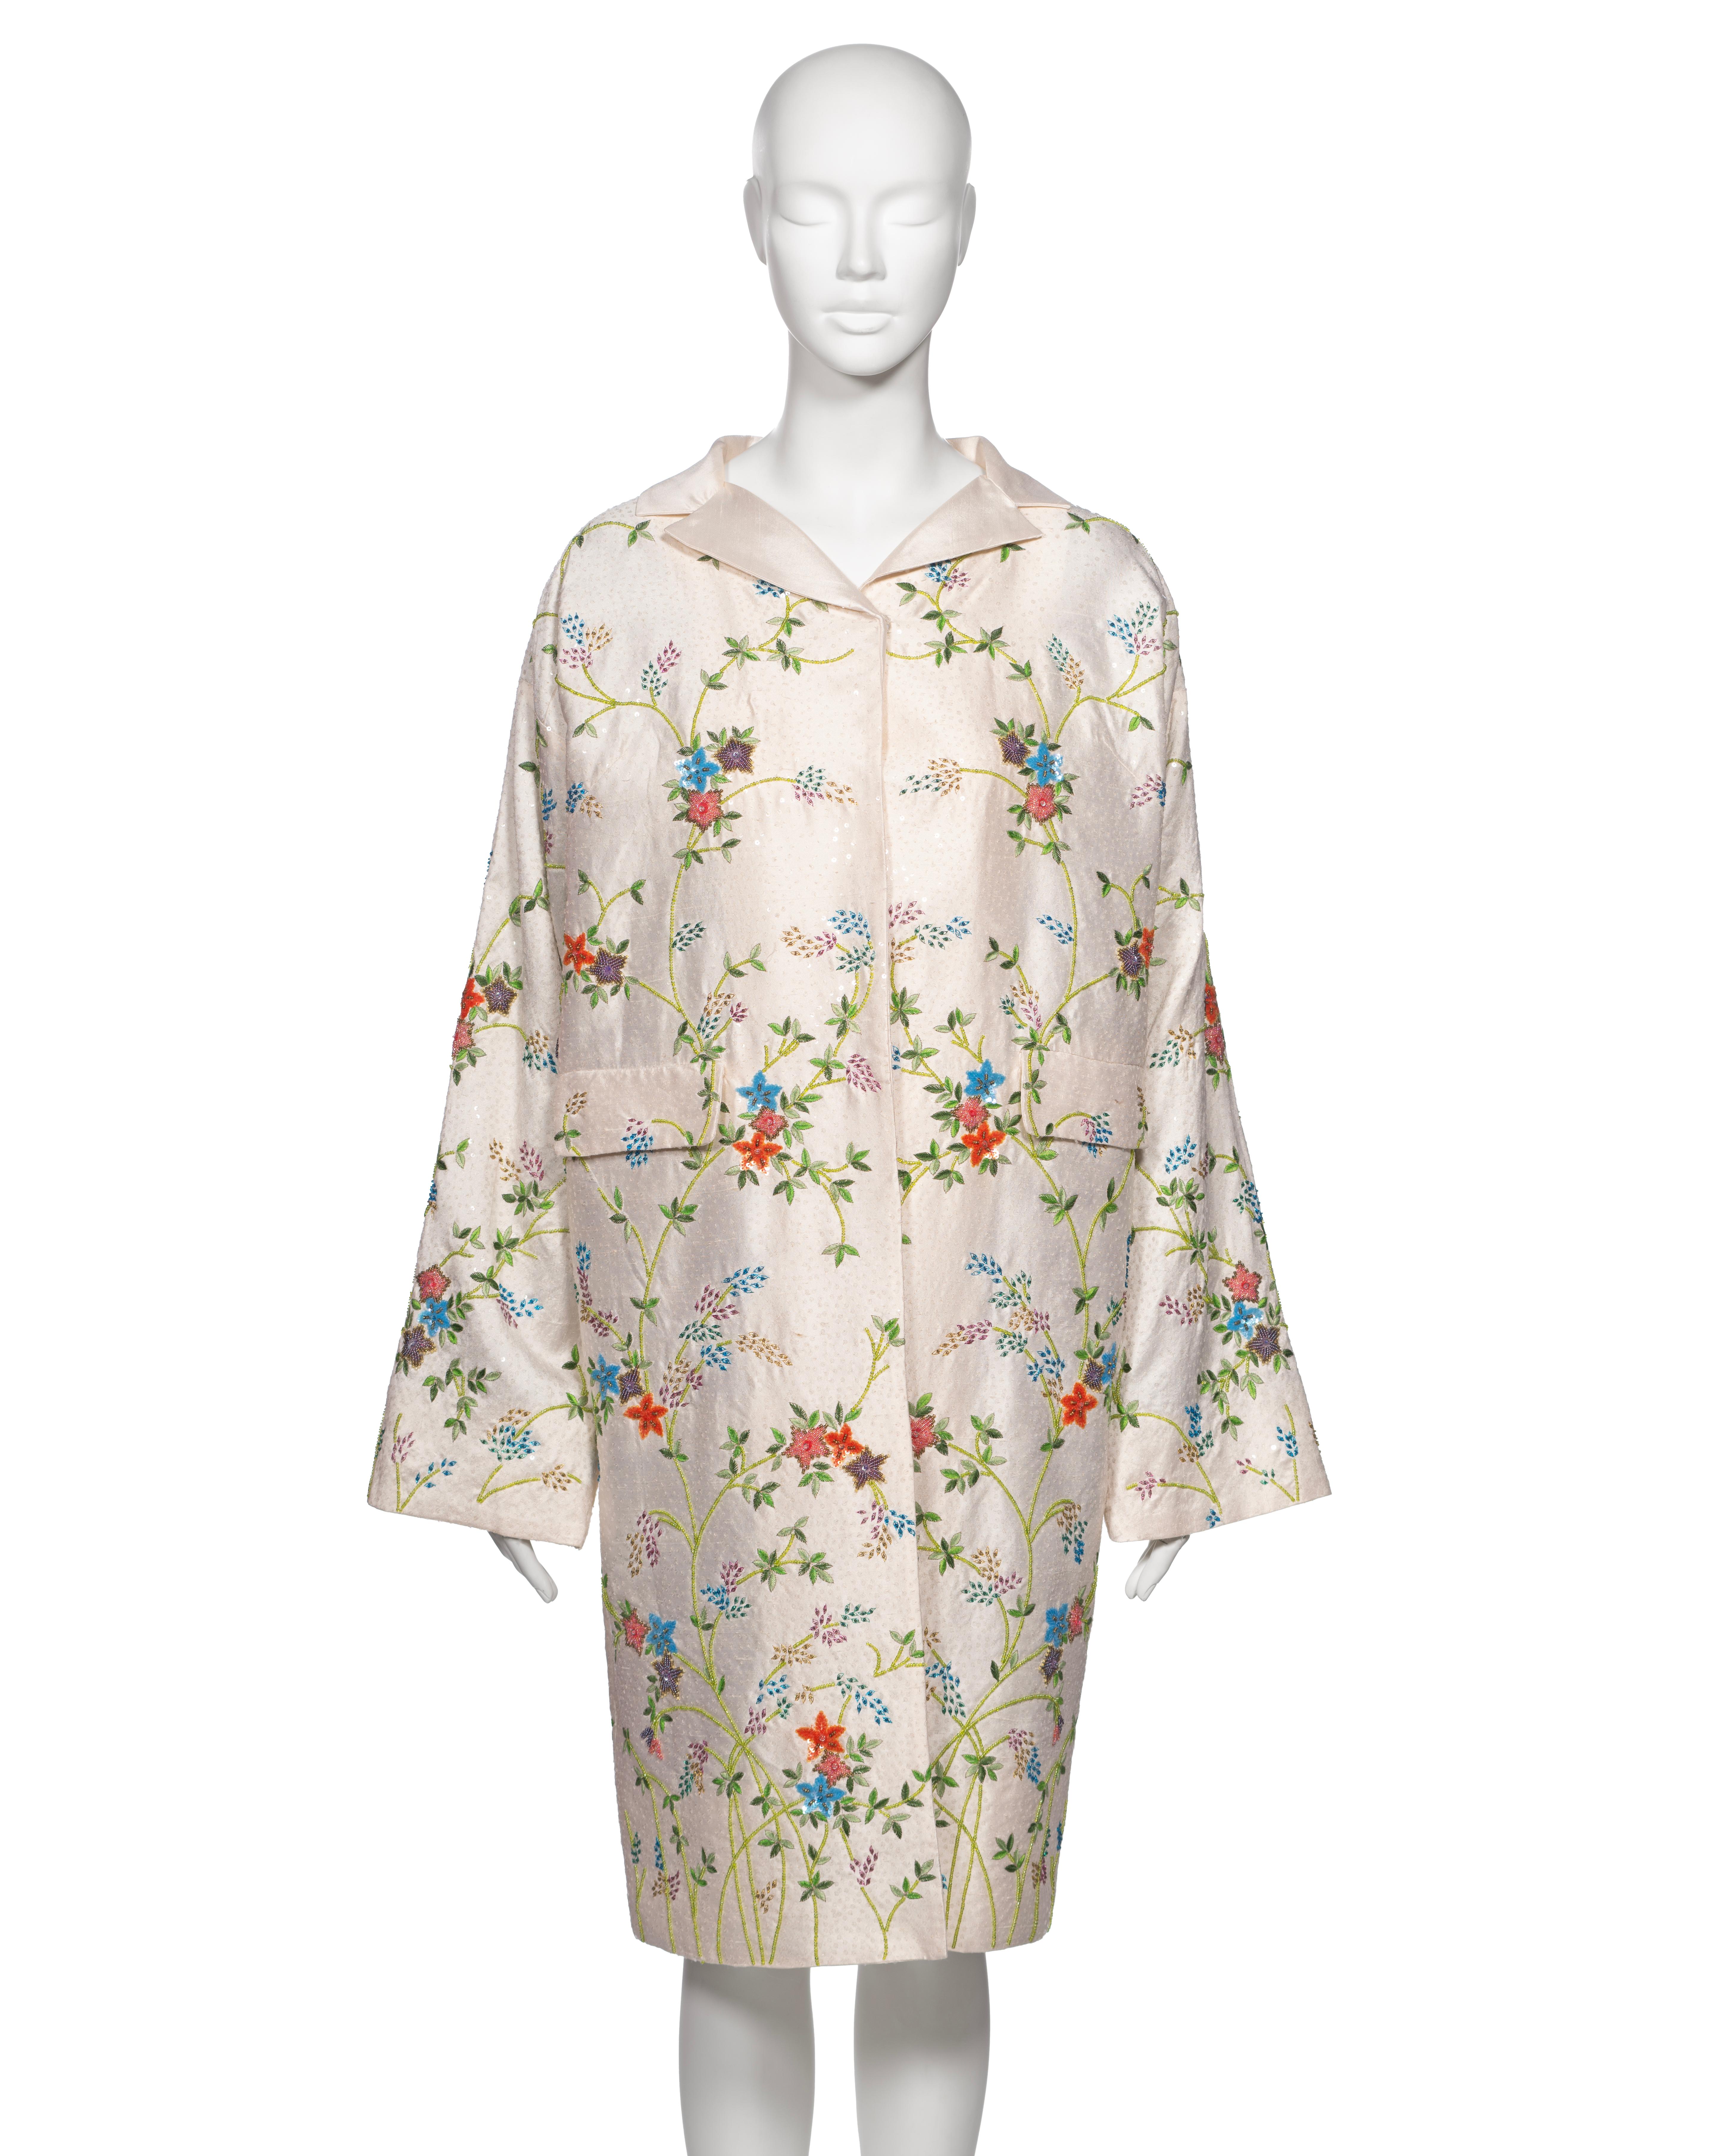 ▪ Archival Dolce & Gabbana Evening Coat
▪ Creative Director: Domenico Dolce and Stefano Gabbana 
▪ Spring-Summer 1997
▪ Sold by One of a Kind Archive
▪ Crafted from high-quality white raw silk, this garment boasts exquisite craftsmanship
▪